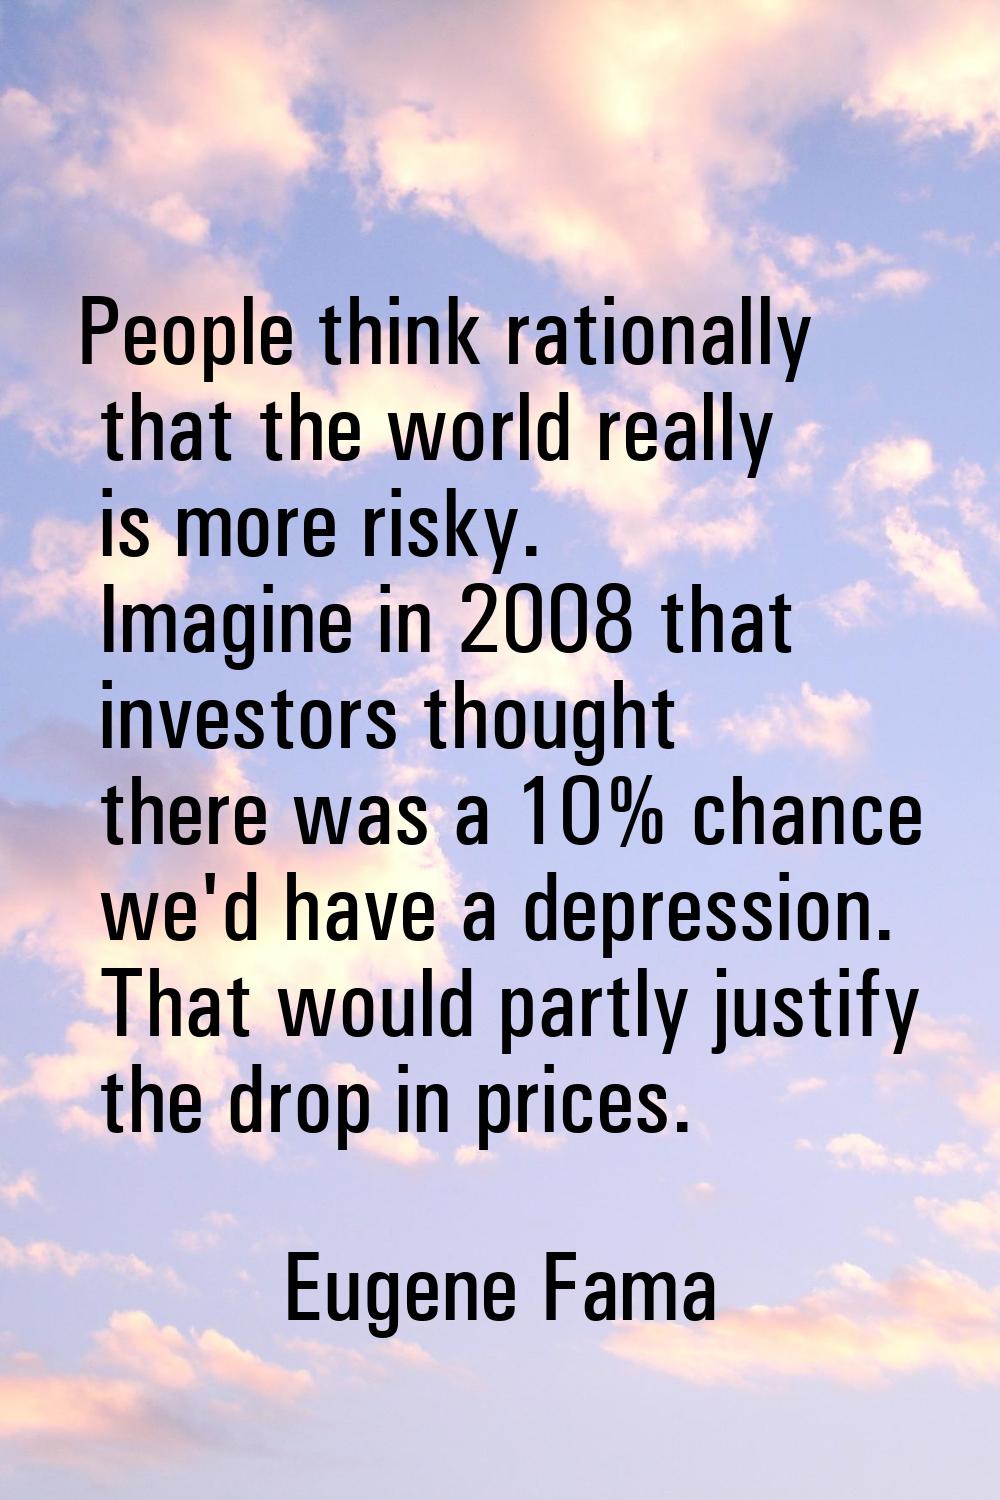 People think rationally that the world really is more risky. Imagine in 2008 that investors thought